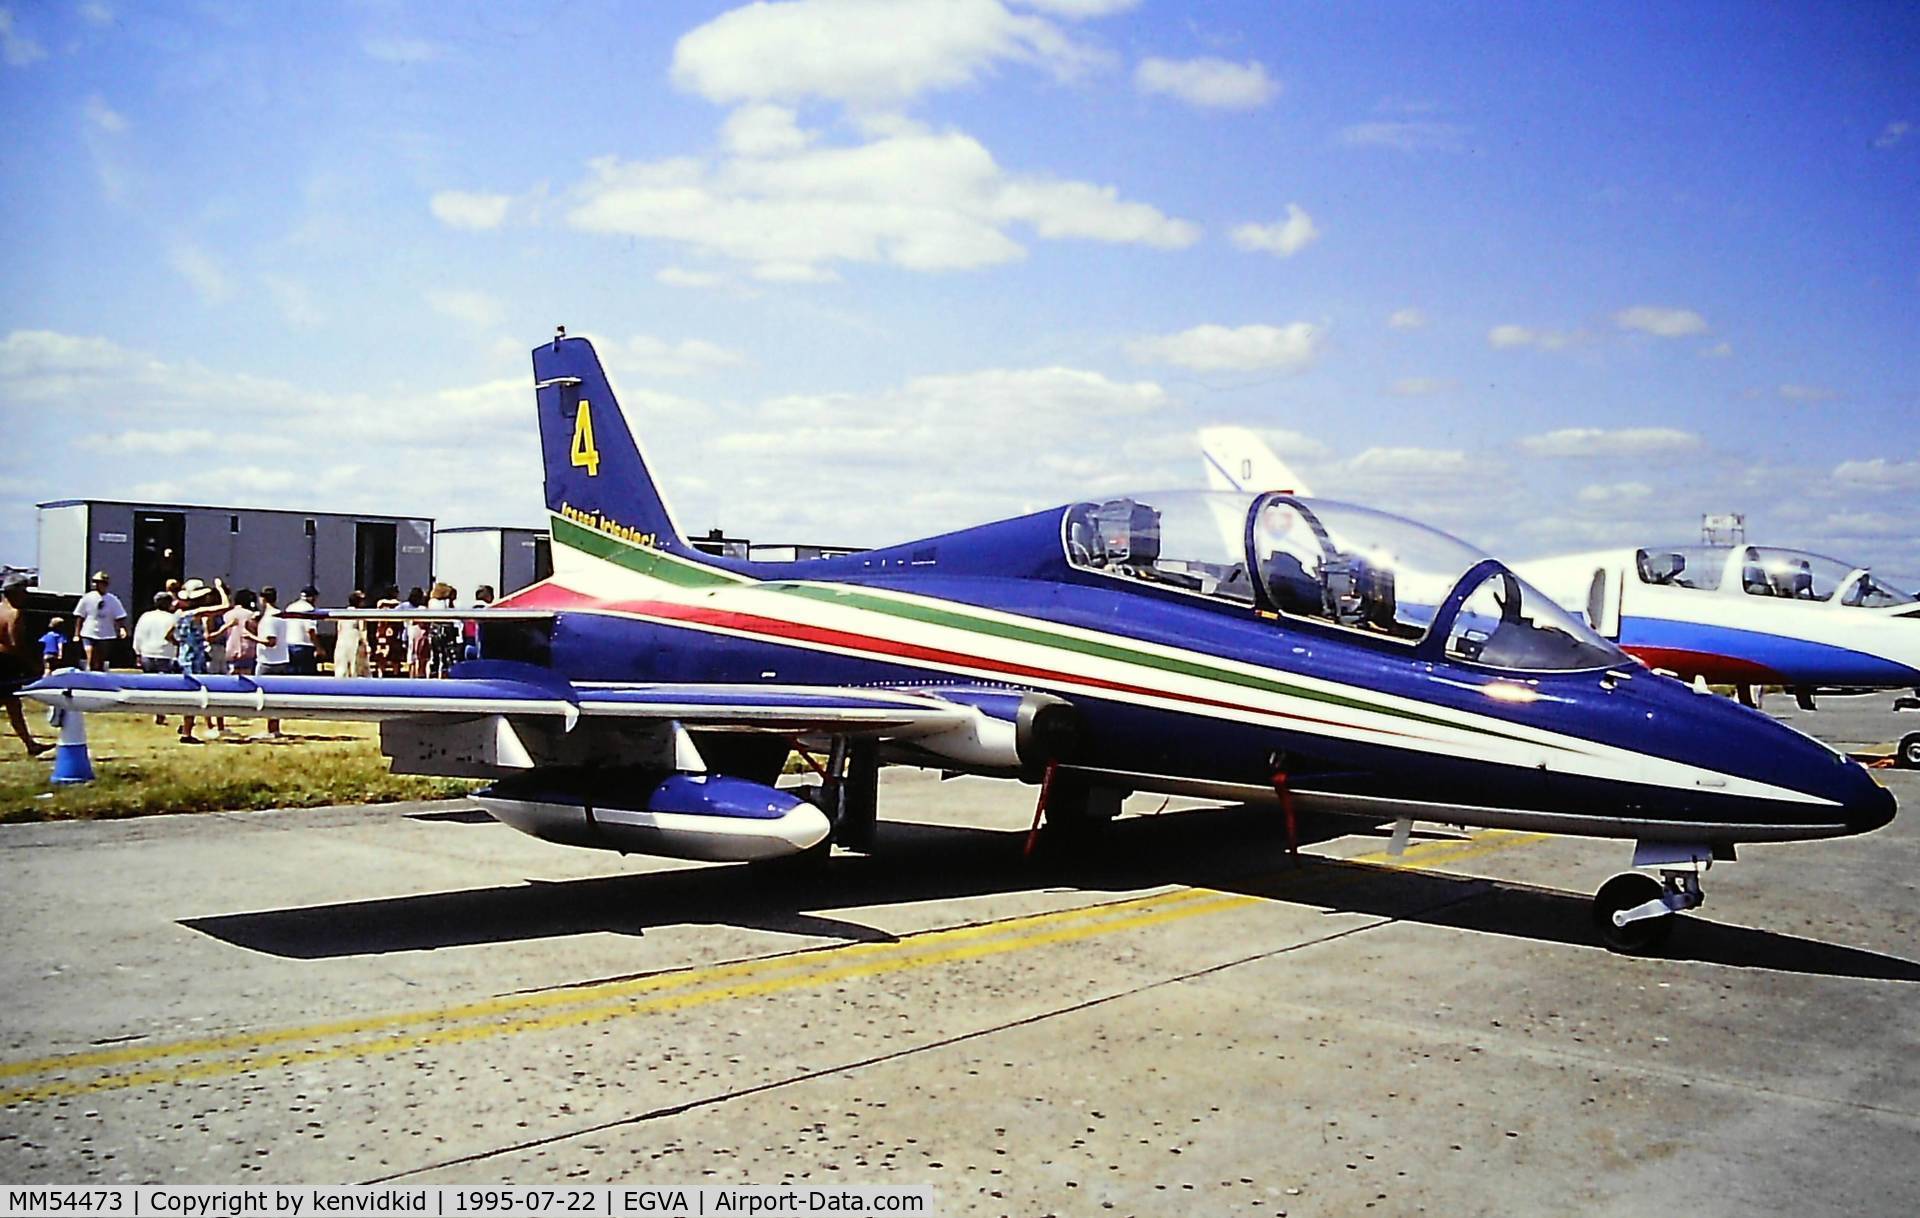 MM54473, Aermacchi MB-339PAN C/N 6668/058/AD002, At the 1995 Fairford International Air Tattoo, scanned from slide.